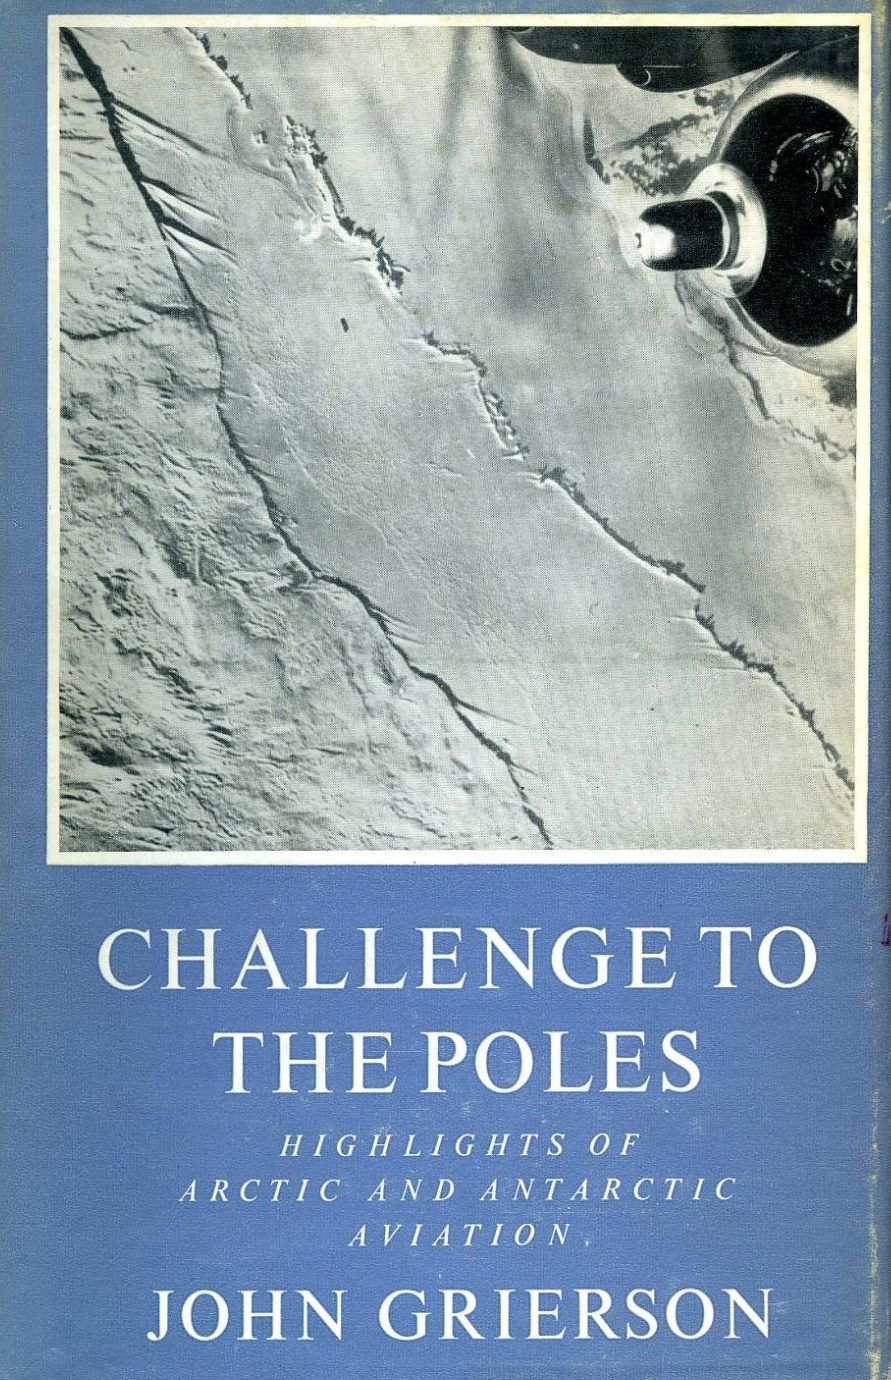 CHALLENGE TO THE POLES: Highlights of Arctic and Antarctic Aviation